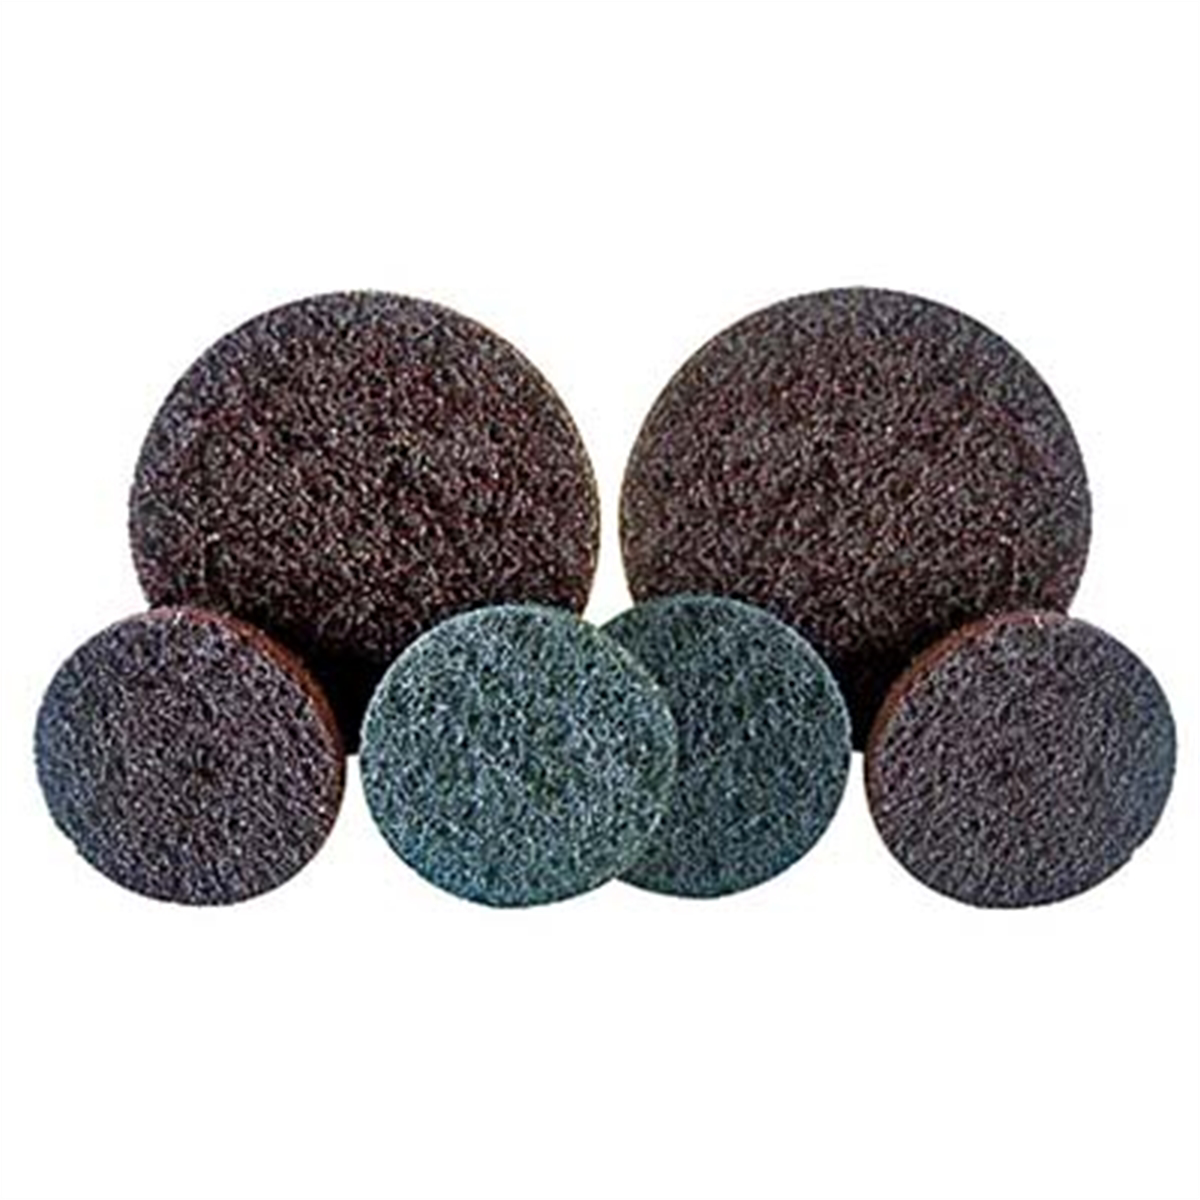 Surface Conditioning Discs - Aluminum Oxide 2" Coarse 10 Pack